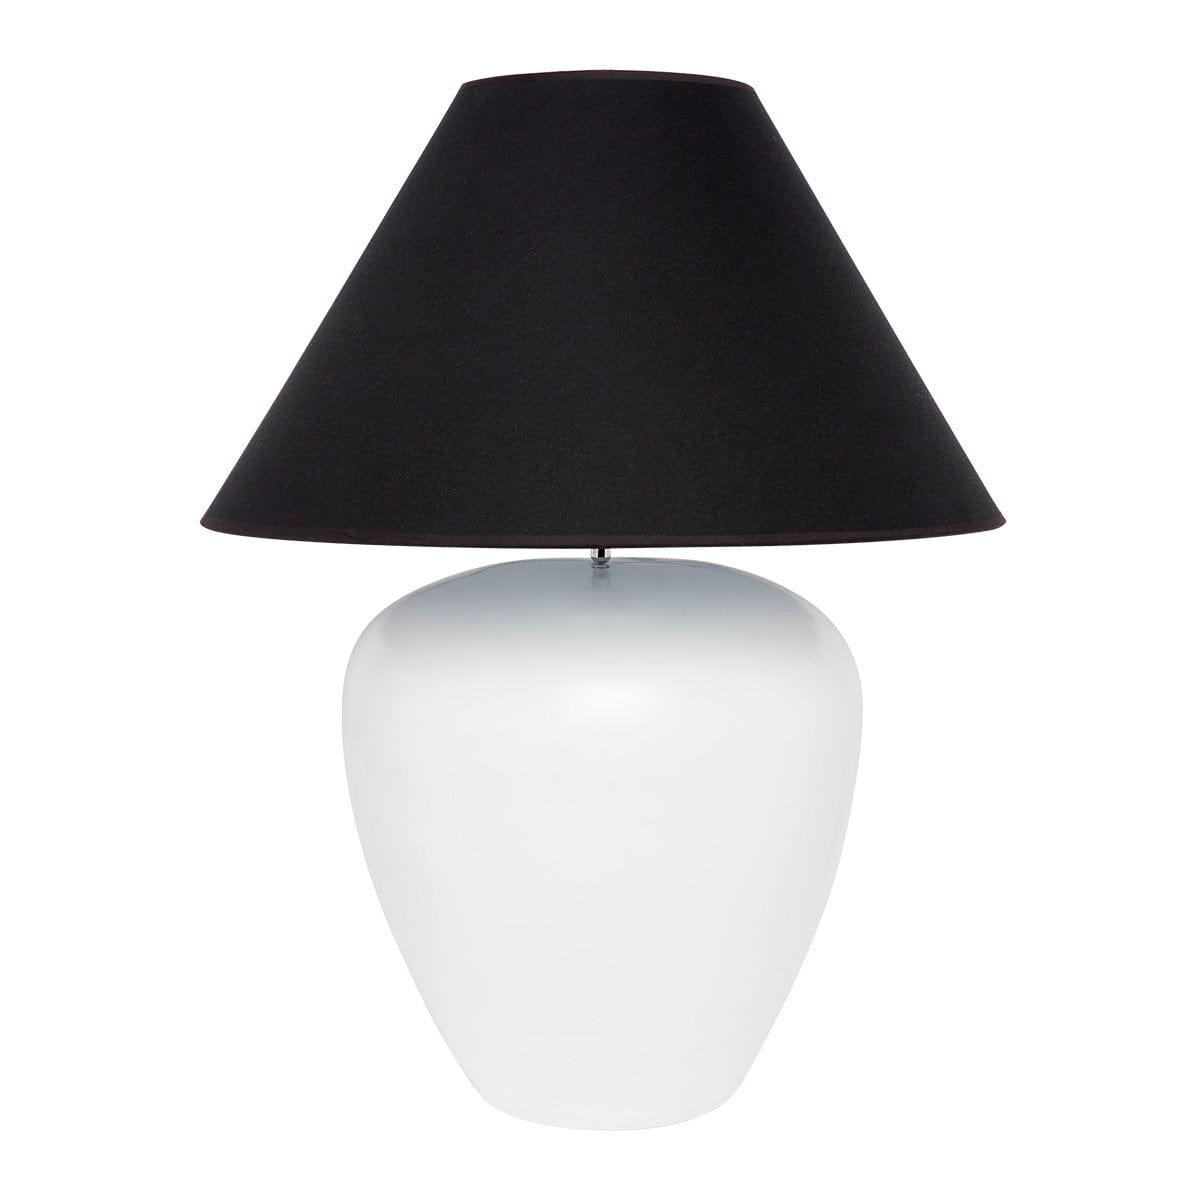 CAFE LIGHTING & LIVING Table Lamp Picasso Table Lamp - White w Black Shade B13294